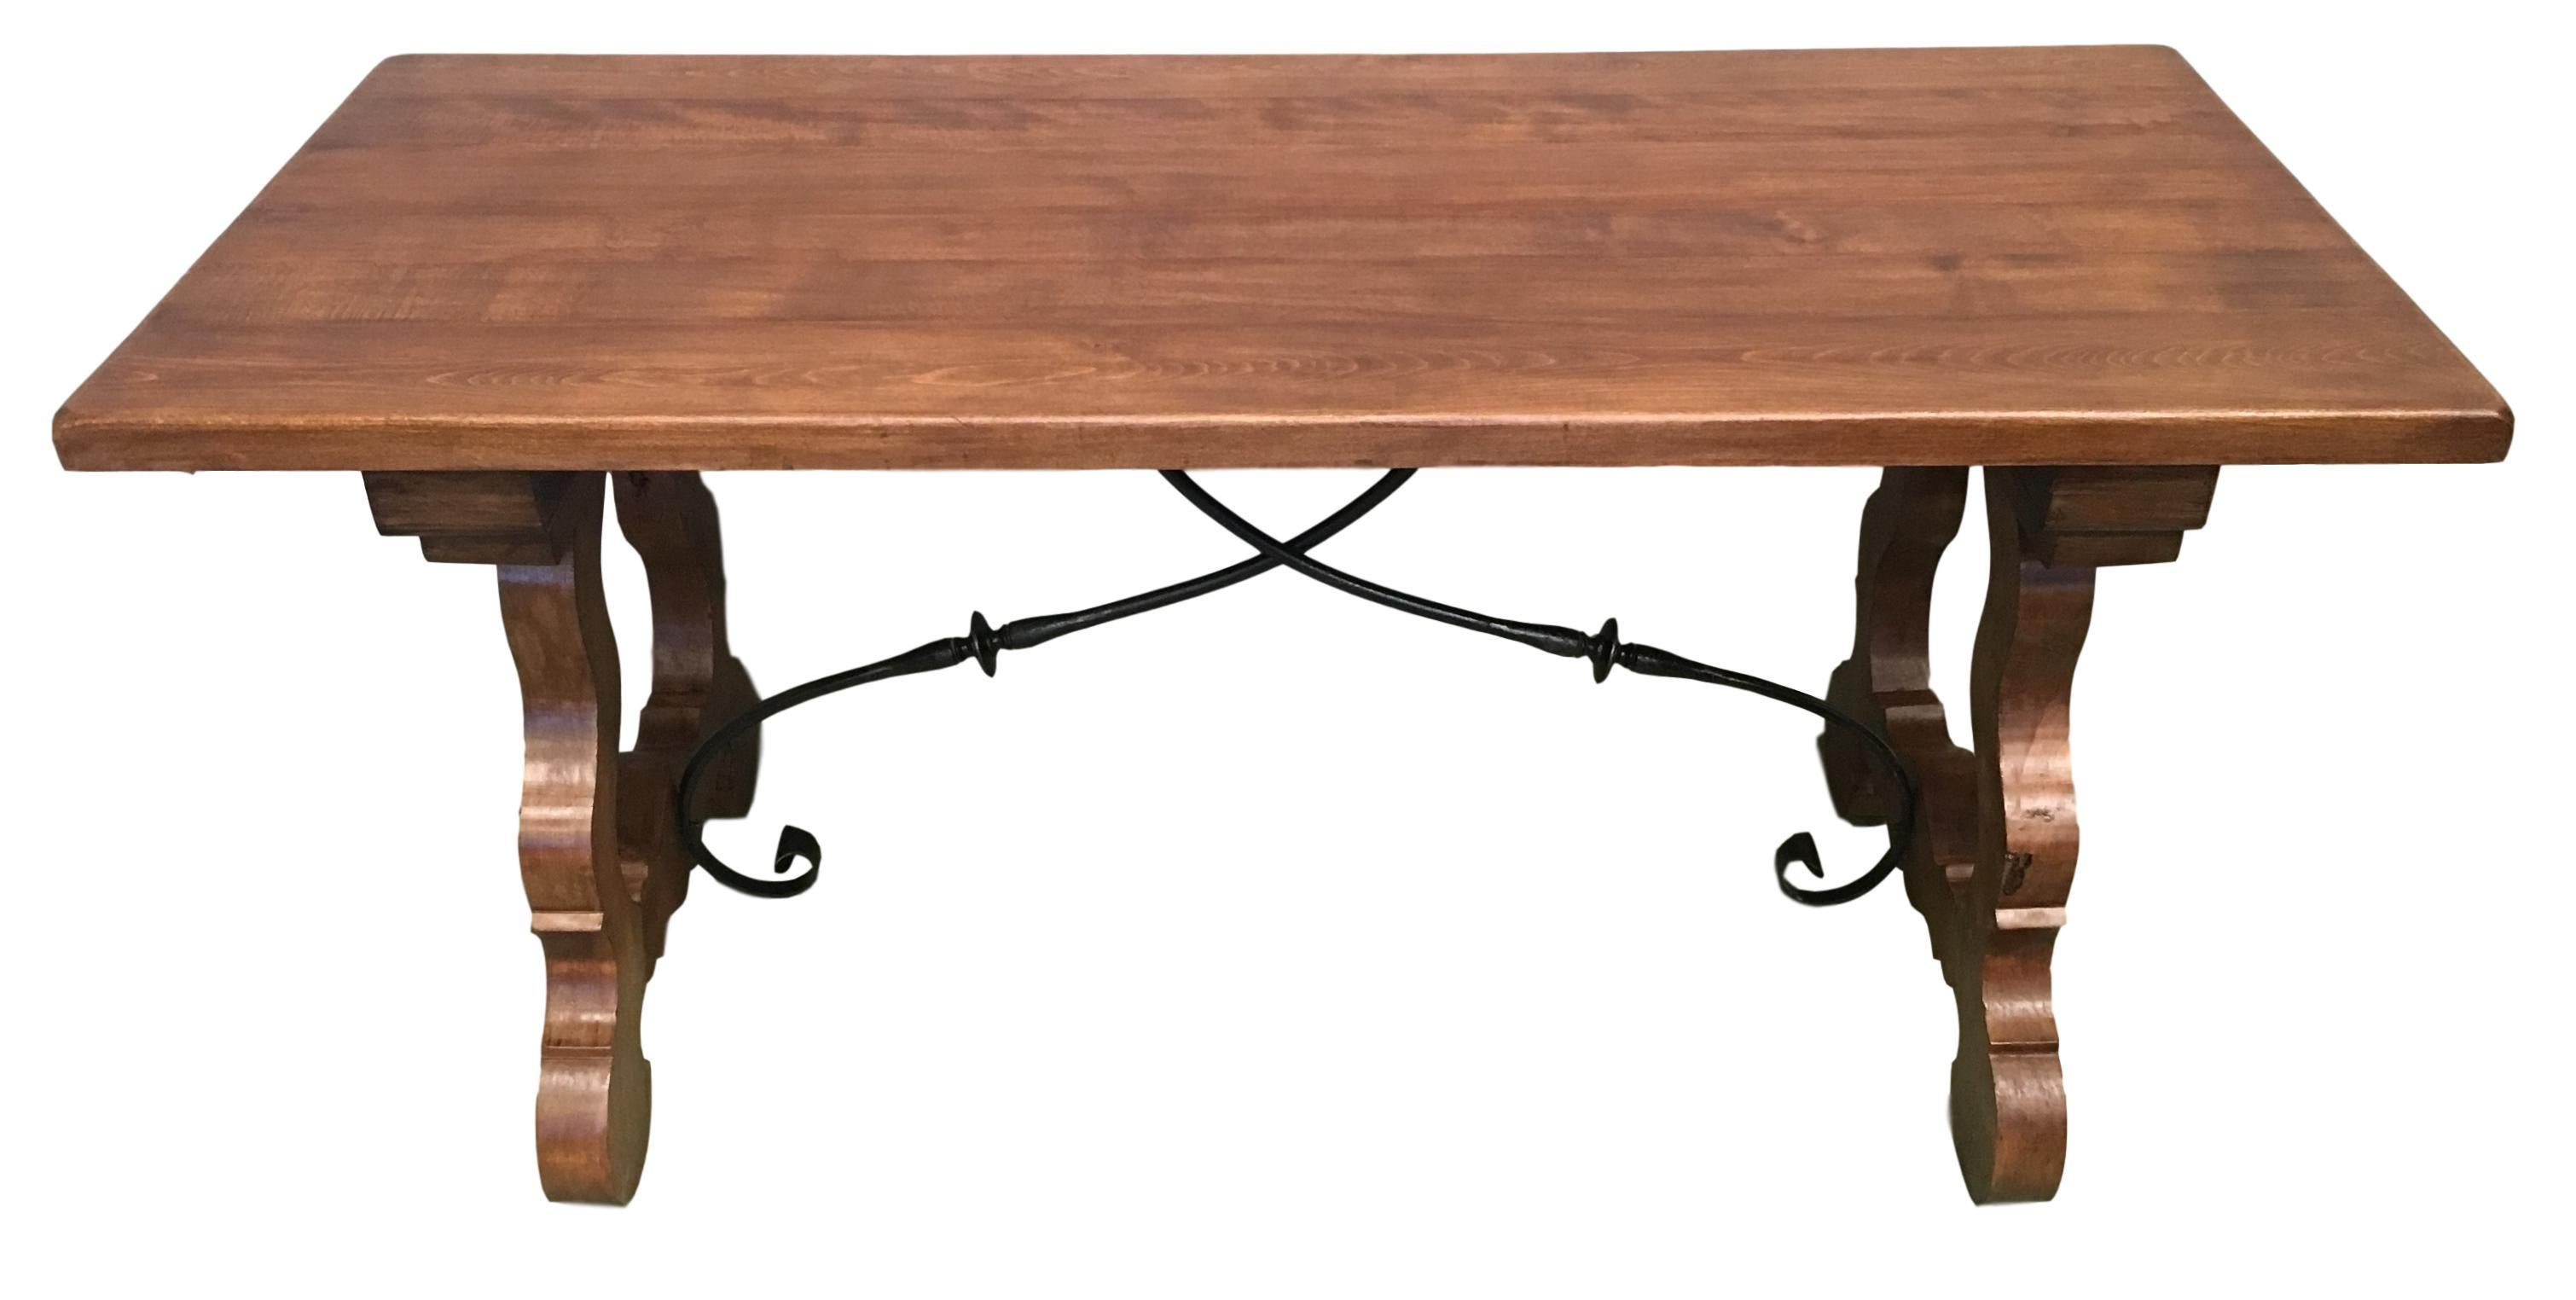 Hand-Carved Early 20th Century Spanish Walnut Trestle Table and Forged Iron Stretcher, Desk